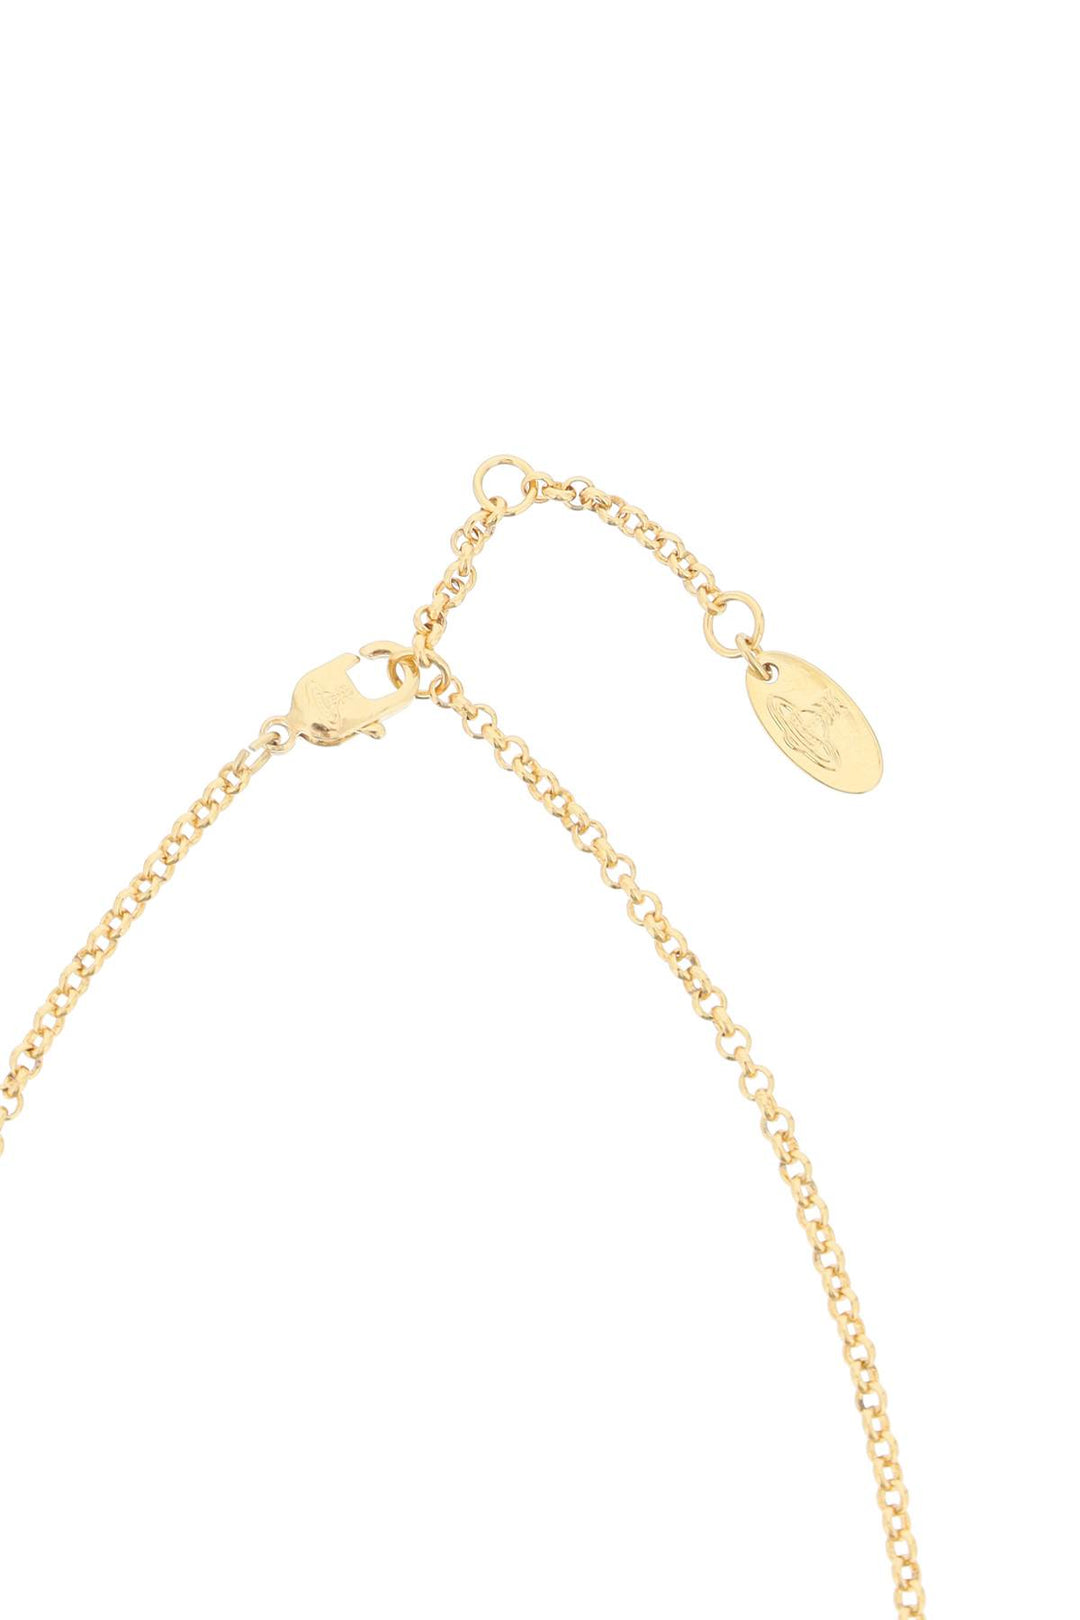 Vivienne Westwood Replace With Double Quotemini Bas Relief Pendant Necklacereplace With Double Quote   Oro